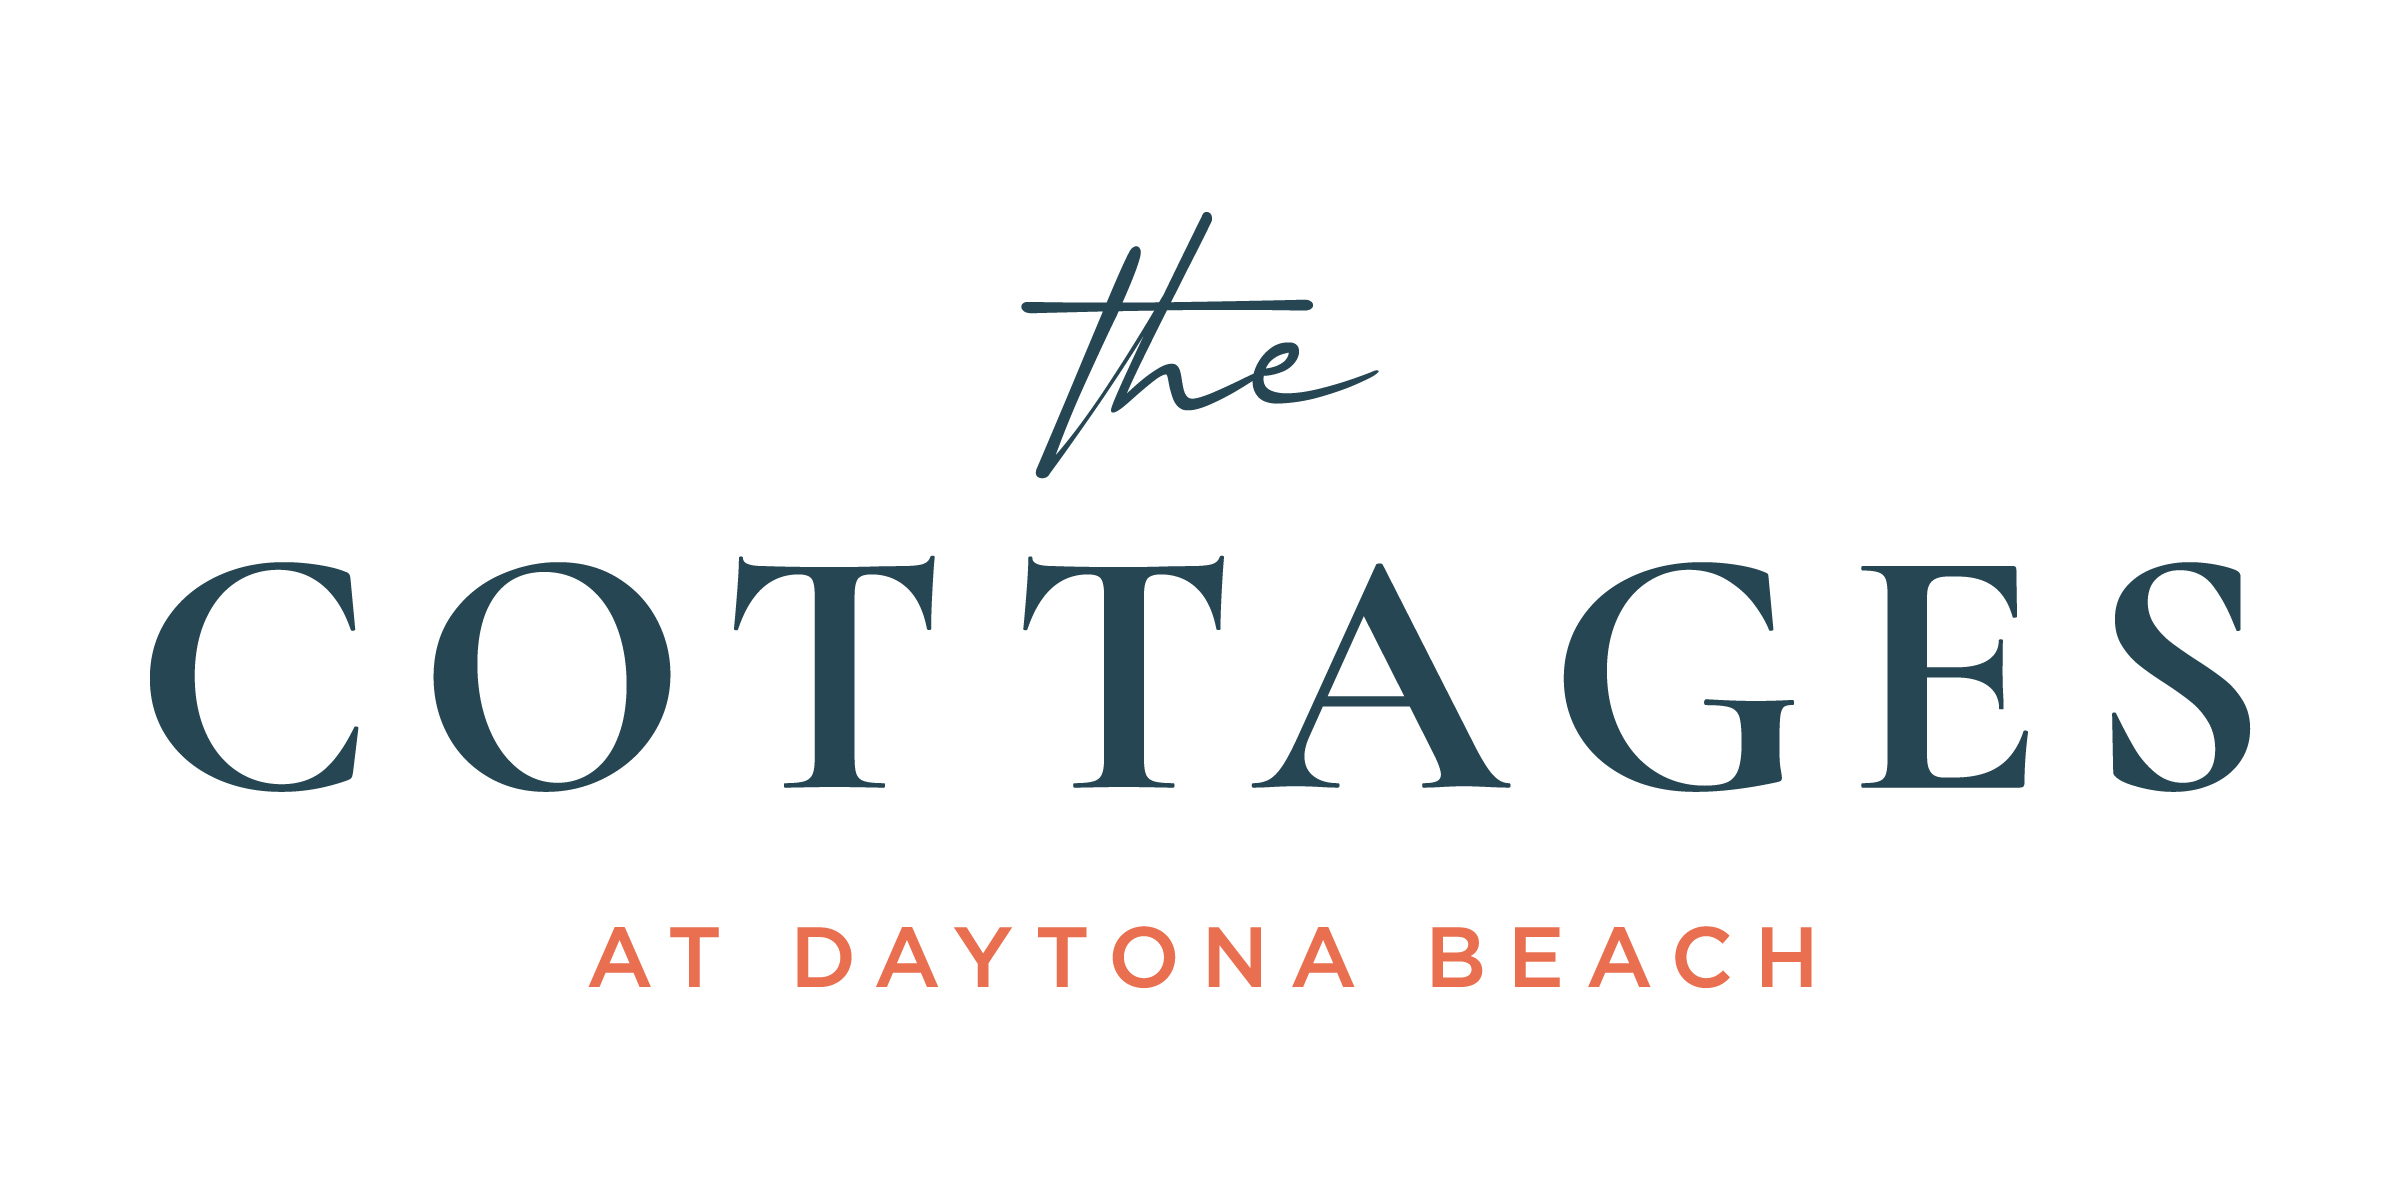 The Cottages At Daytona Beach